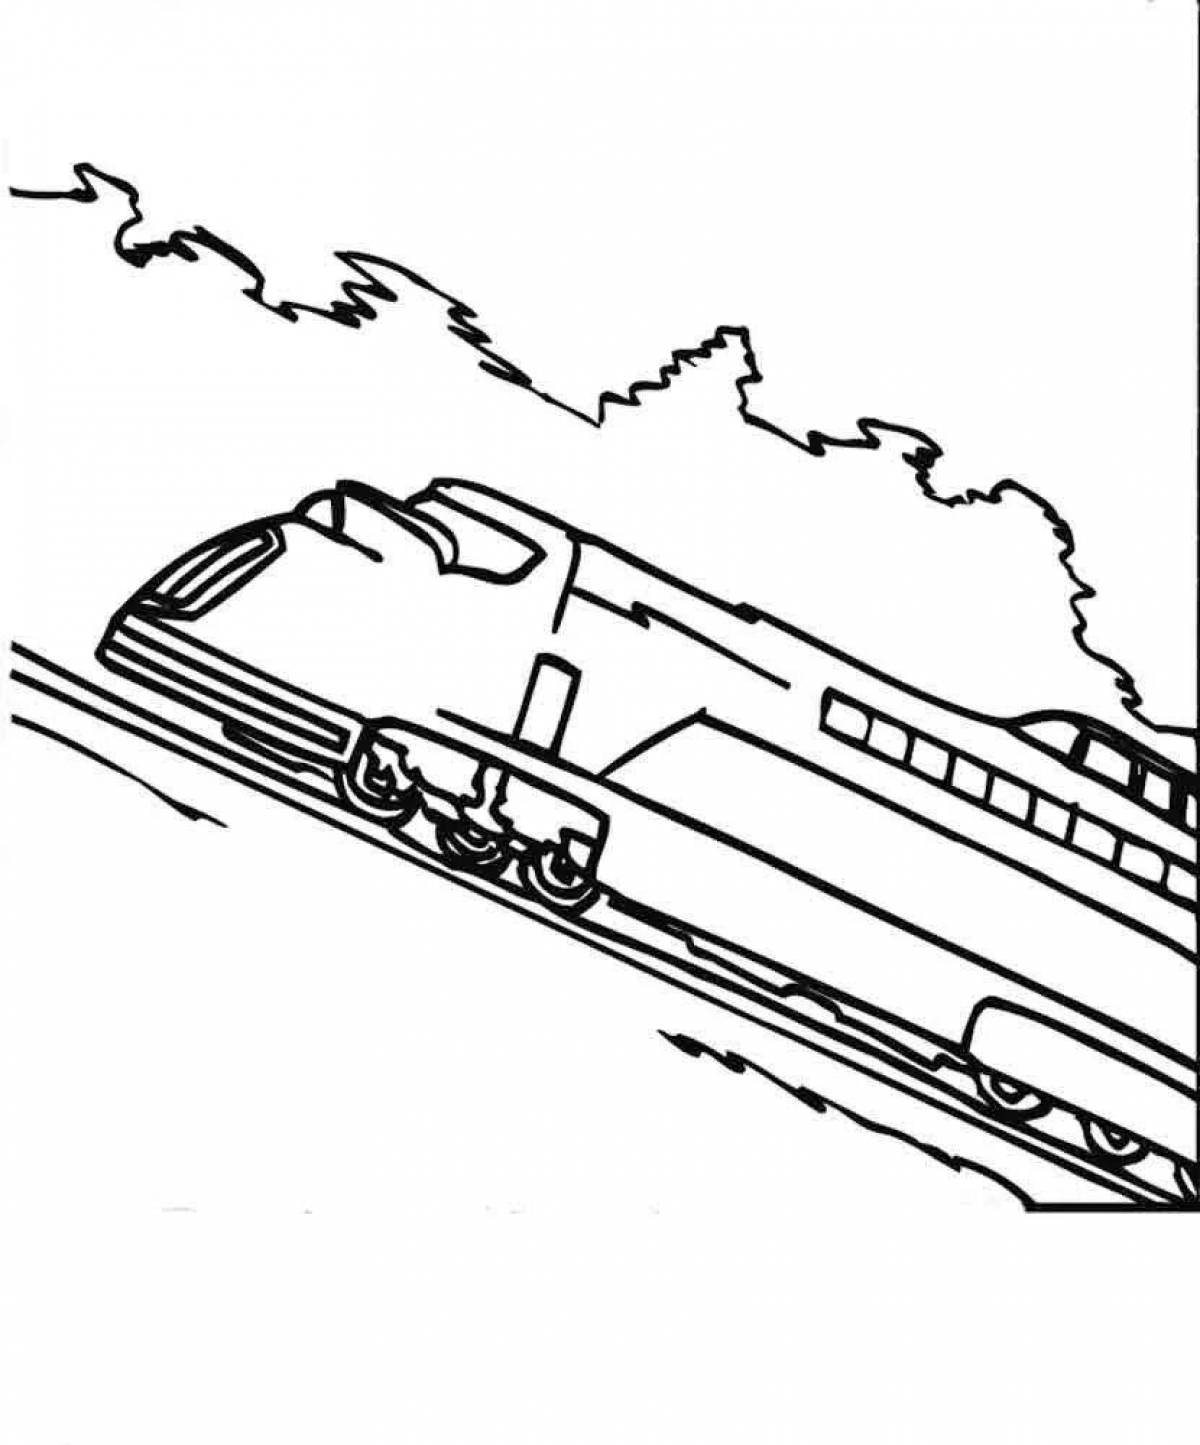 Fabulous freight train coloring book for kids